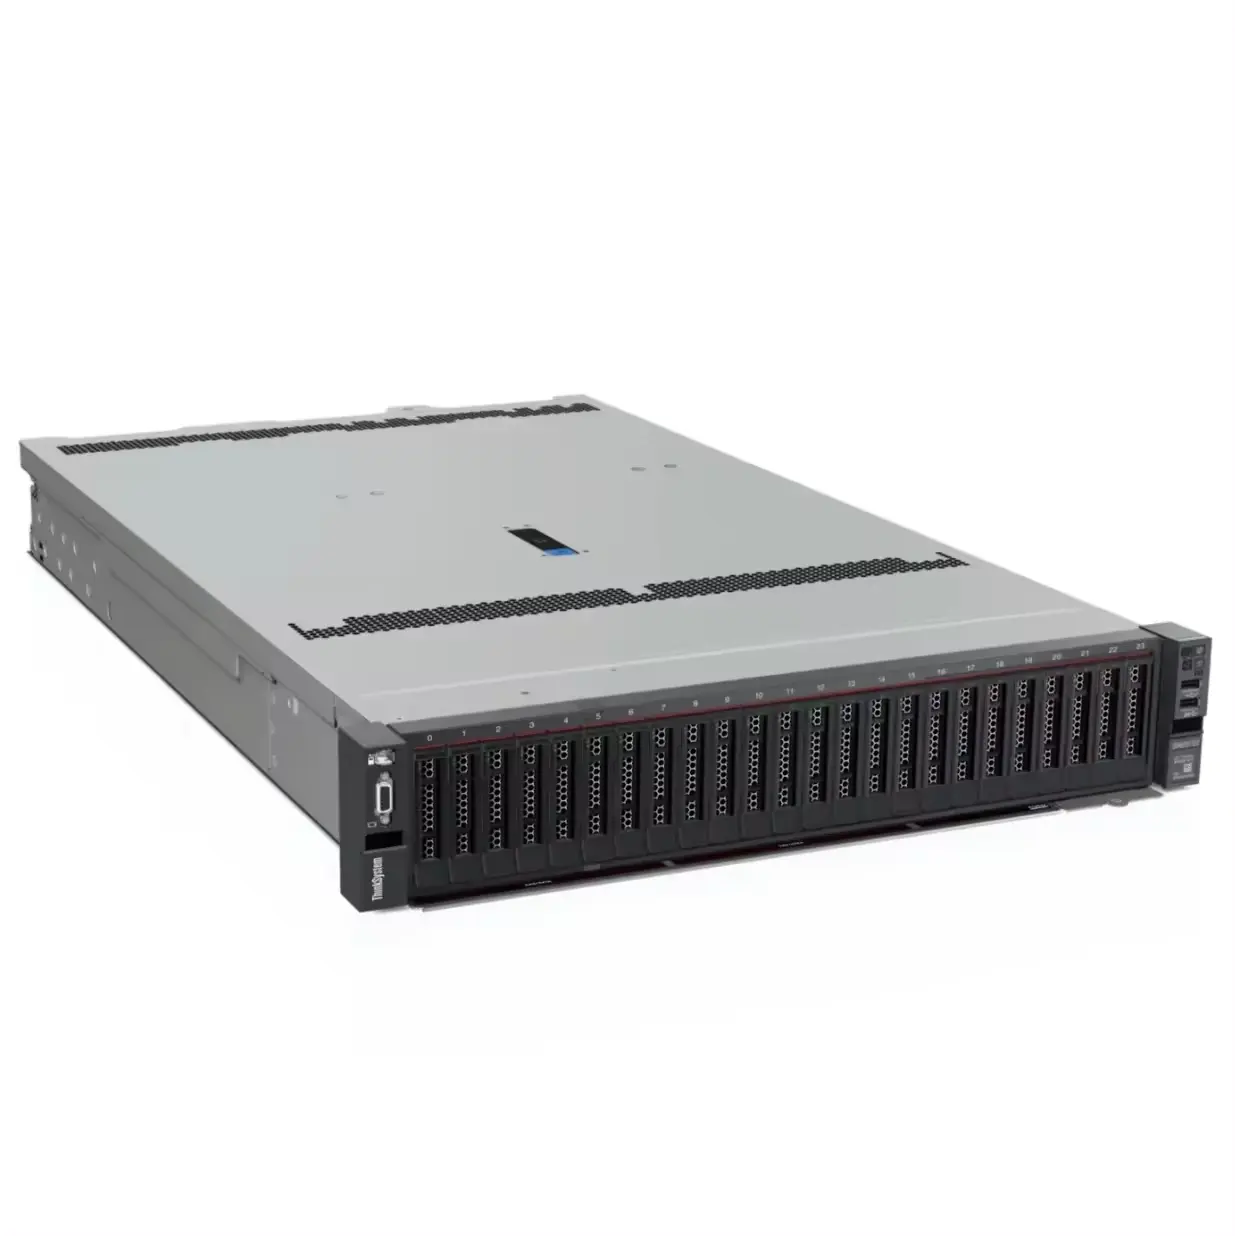 ThinkSystem SR655 V3 is a 1-socket 2U server that features the AMD EPYC 9004 "Genoa" family of processors